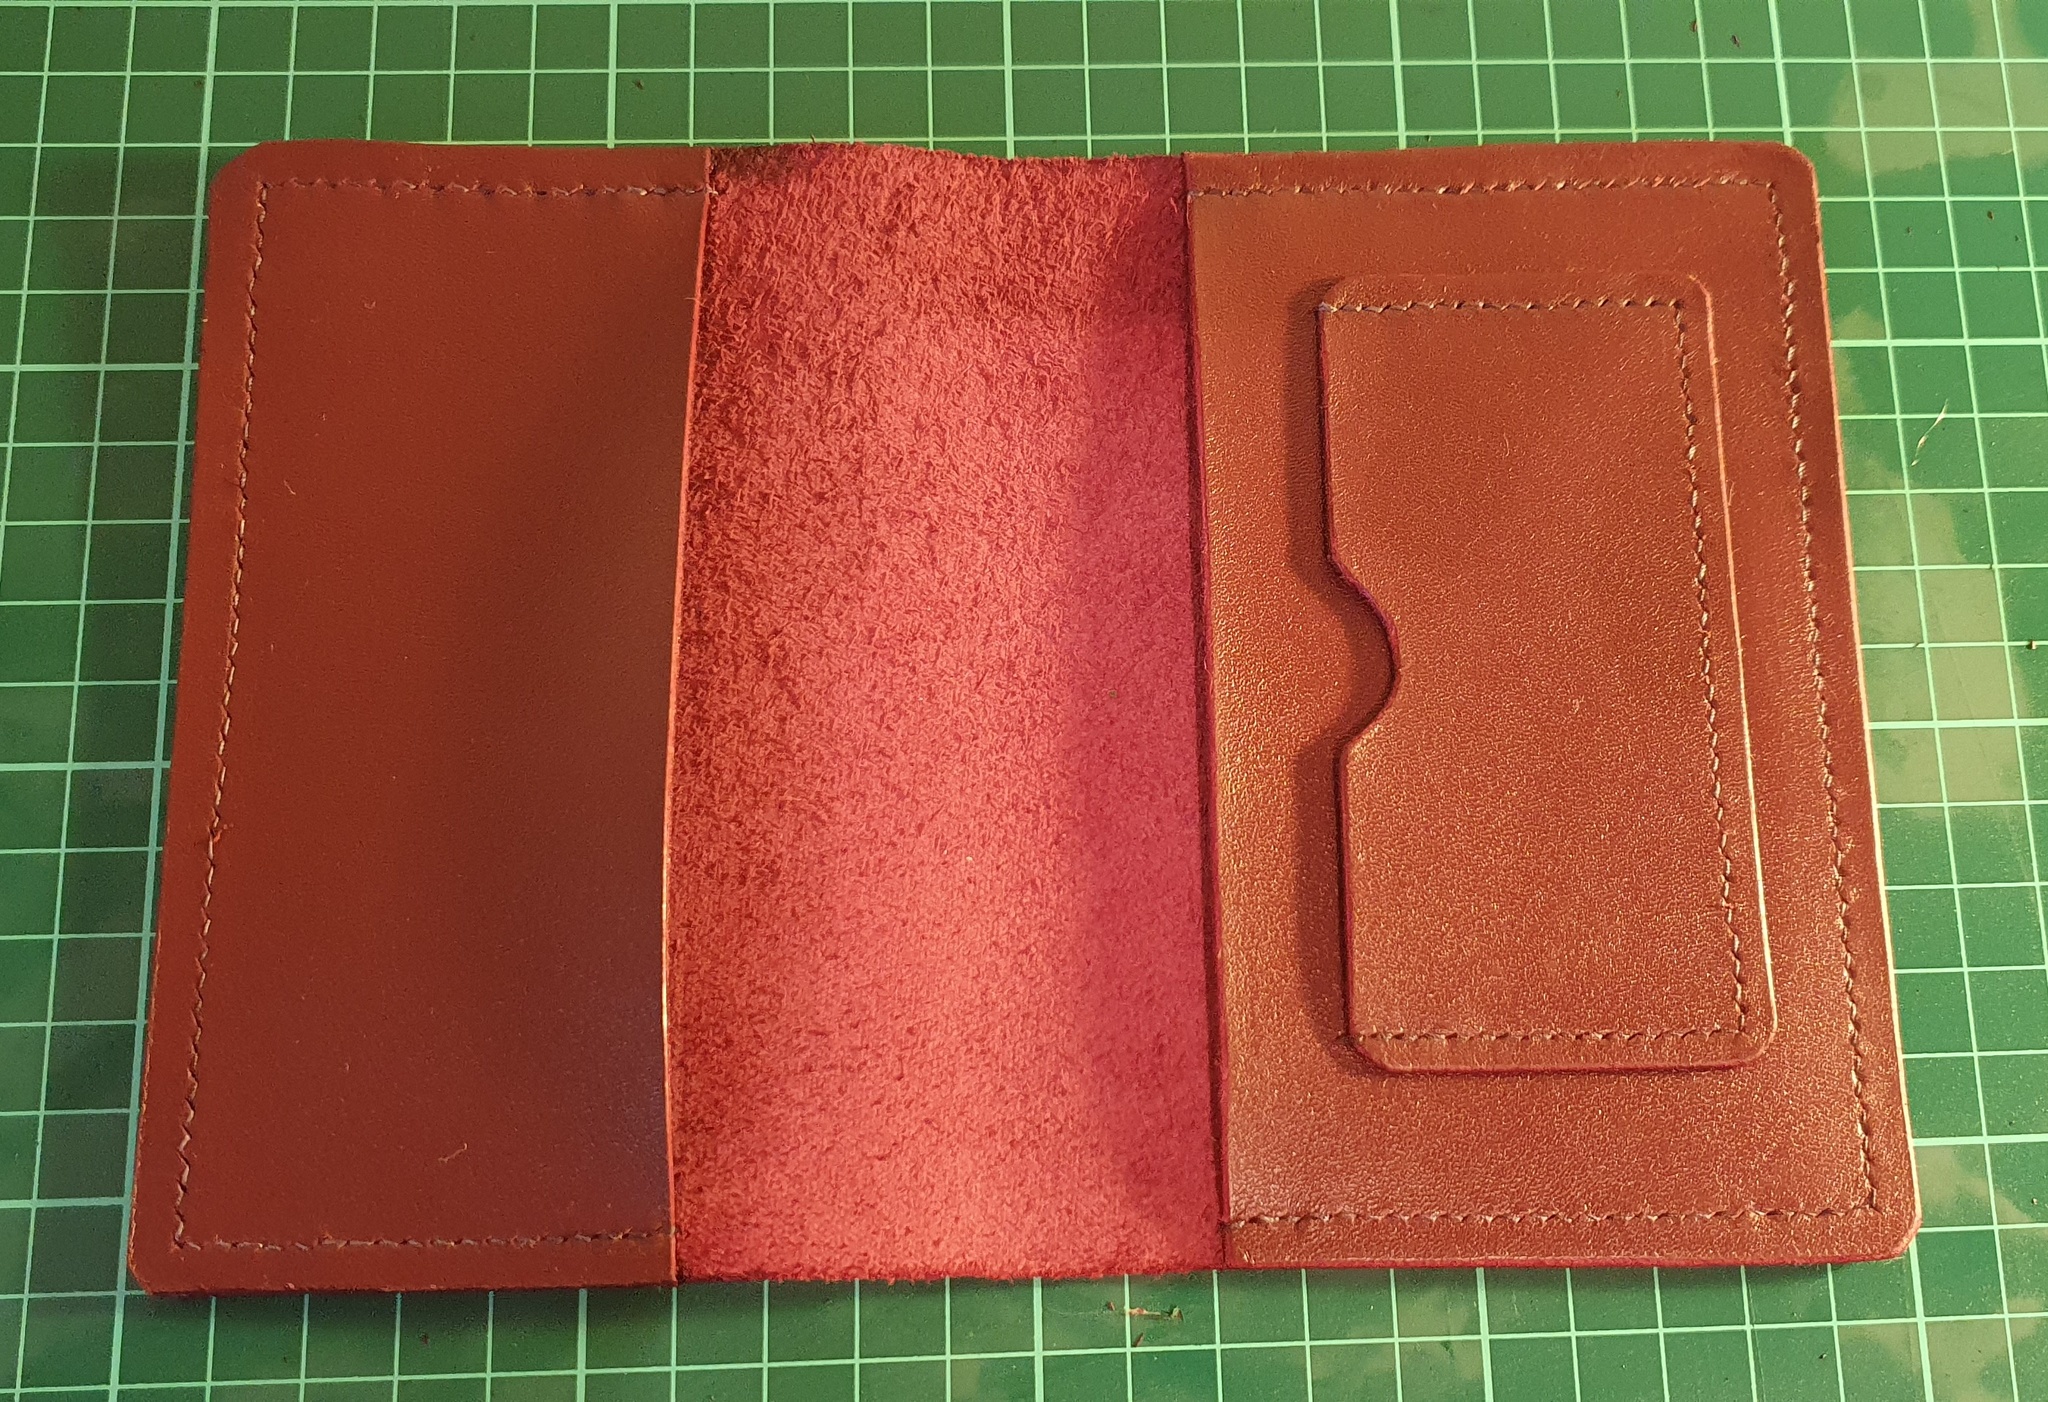 Attempt number two (same unsuccessful) - My, Leather products, Handmade, Natural leather, Longpost